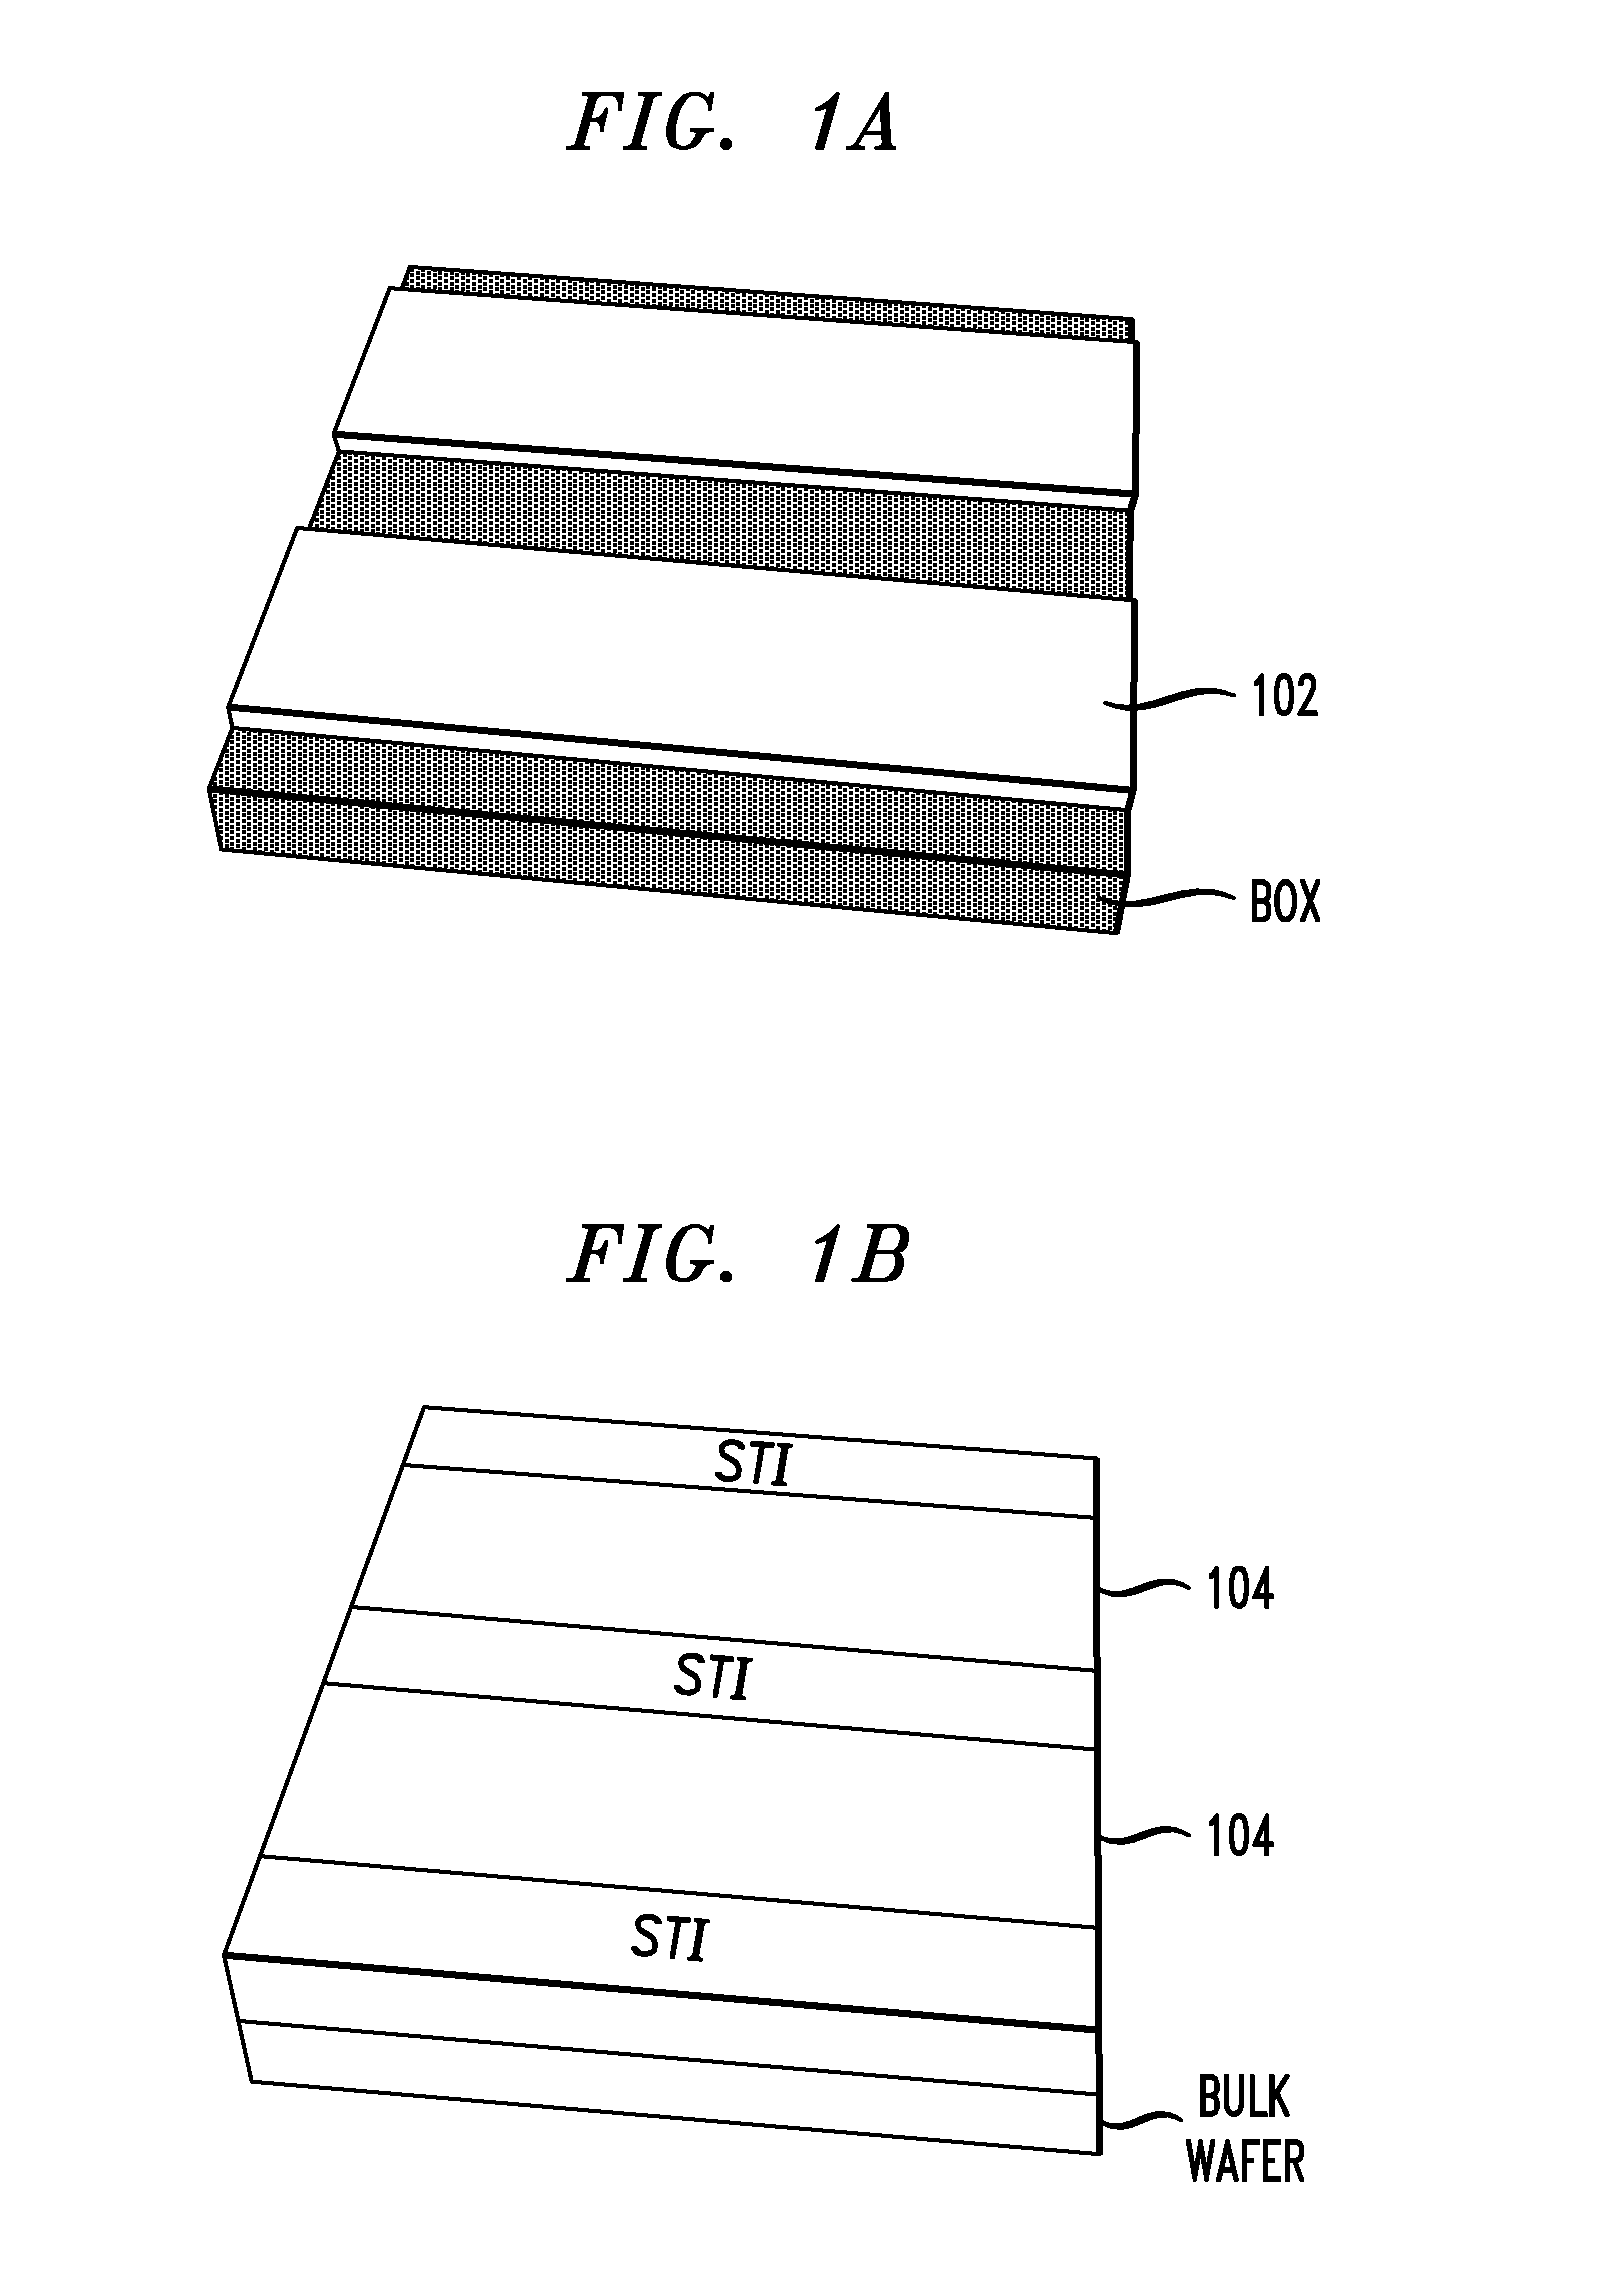 Method for Keyhole Repair in Replacement Metal Gate Integration Through the Use of a Printable Dielectric